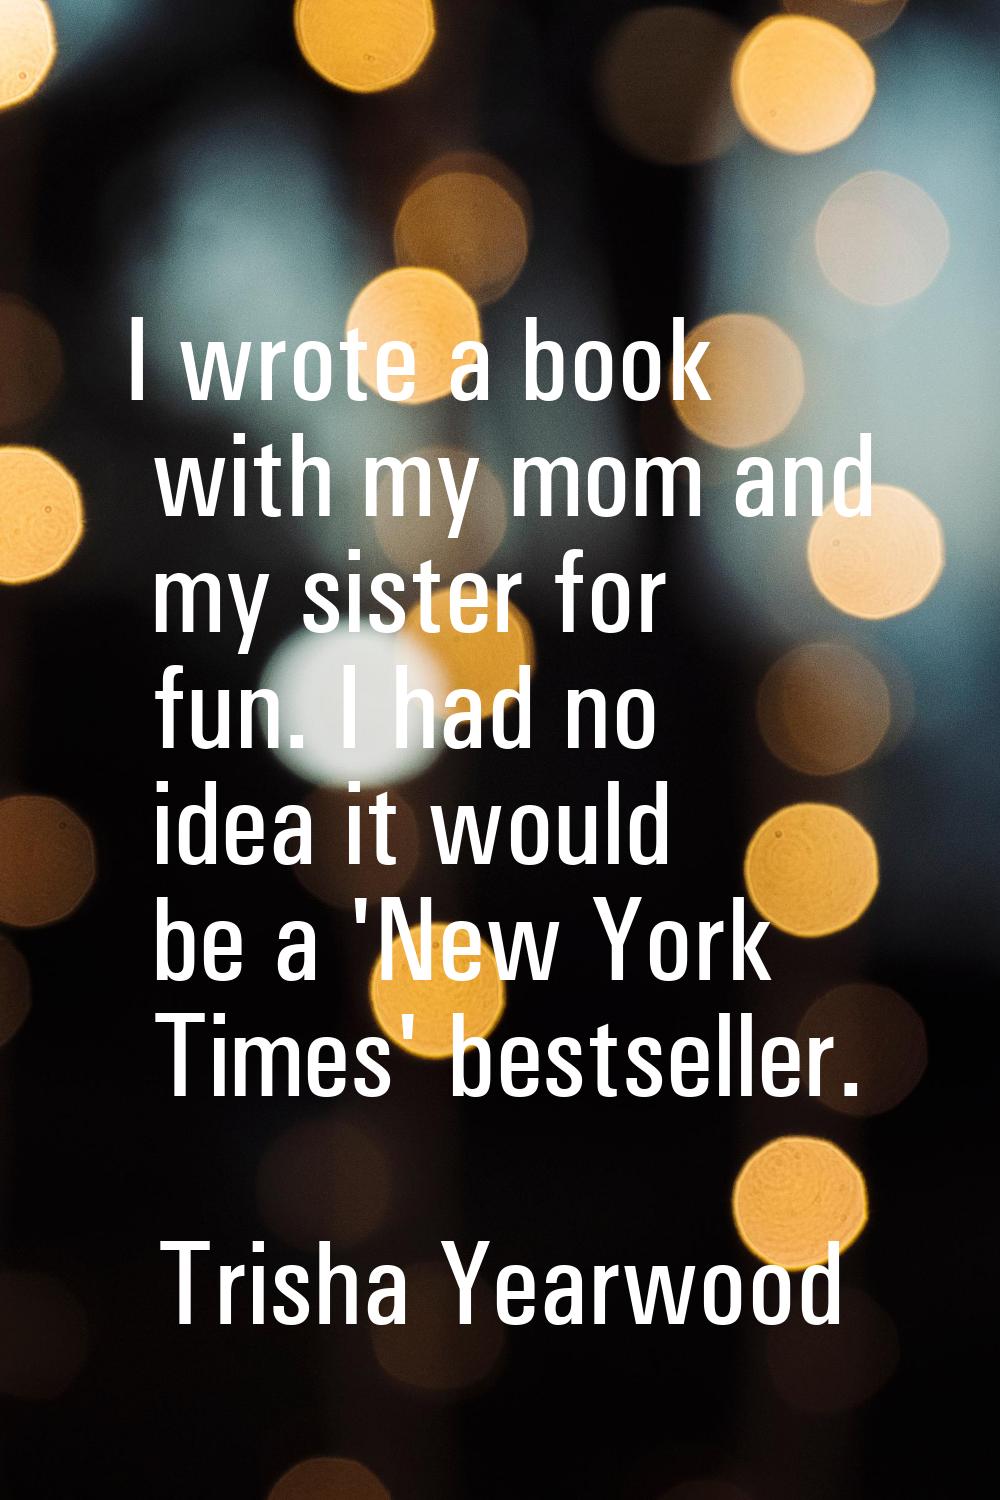 I wrote a book with my mom and my sister for fun. I had no idea it would be a 'New York Times' best